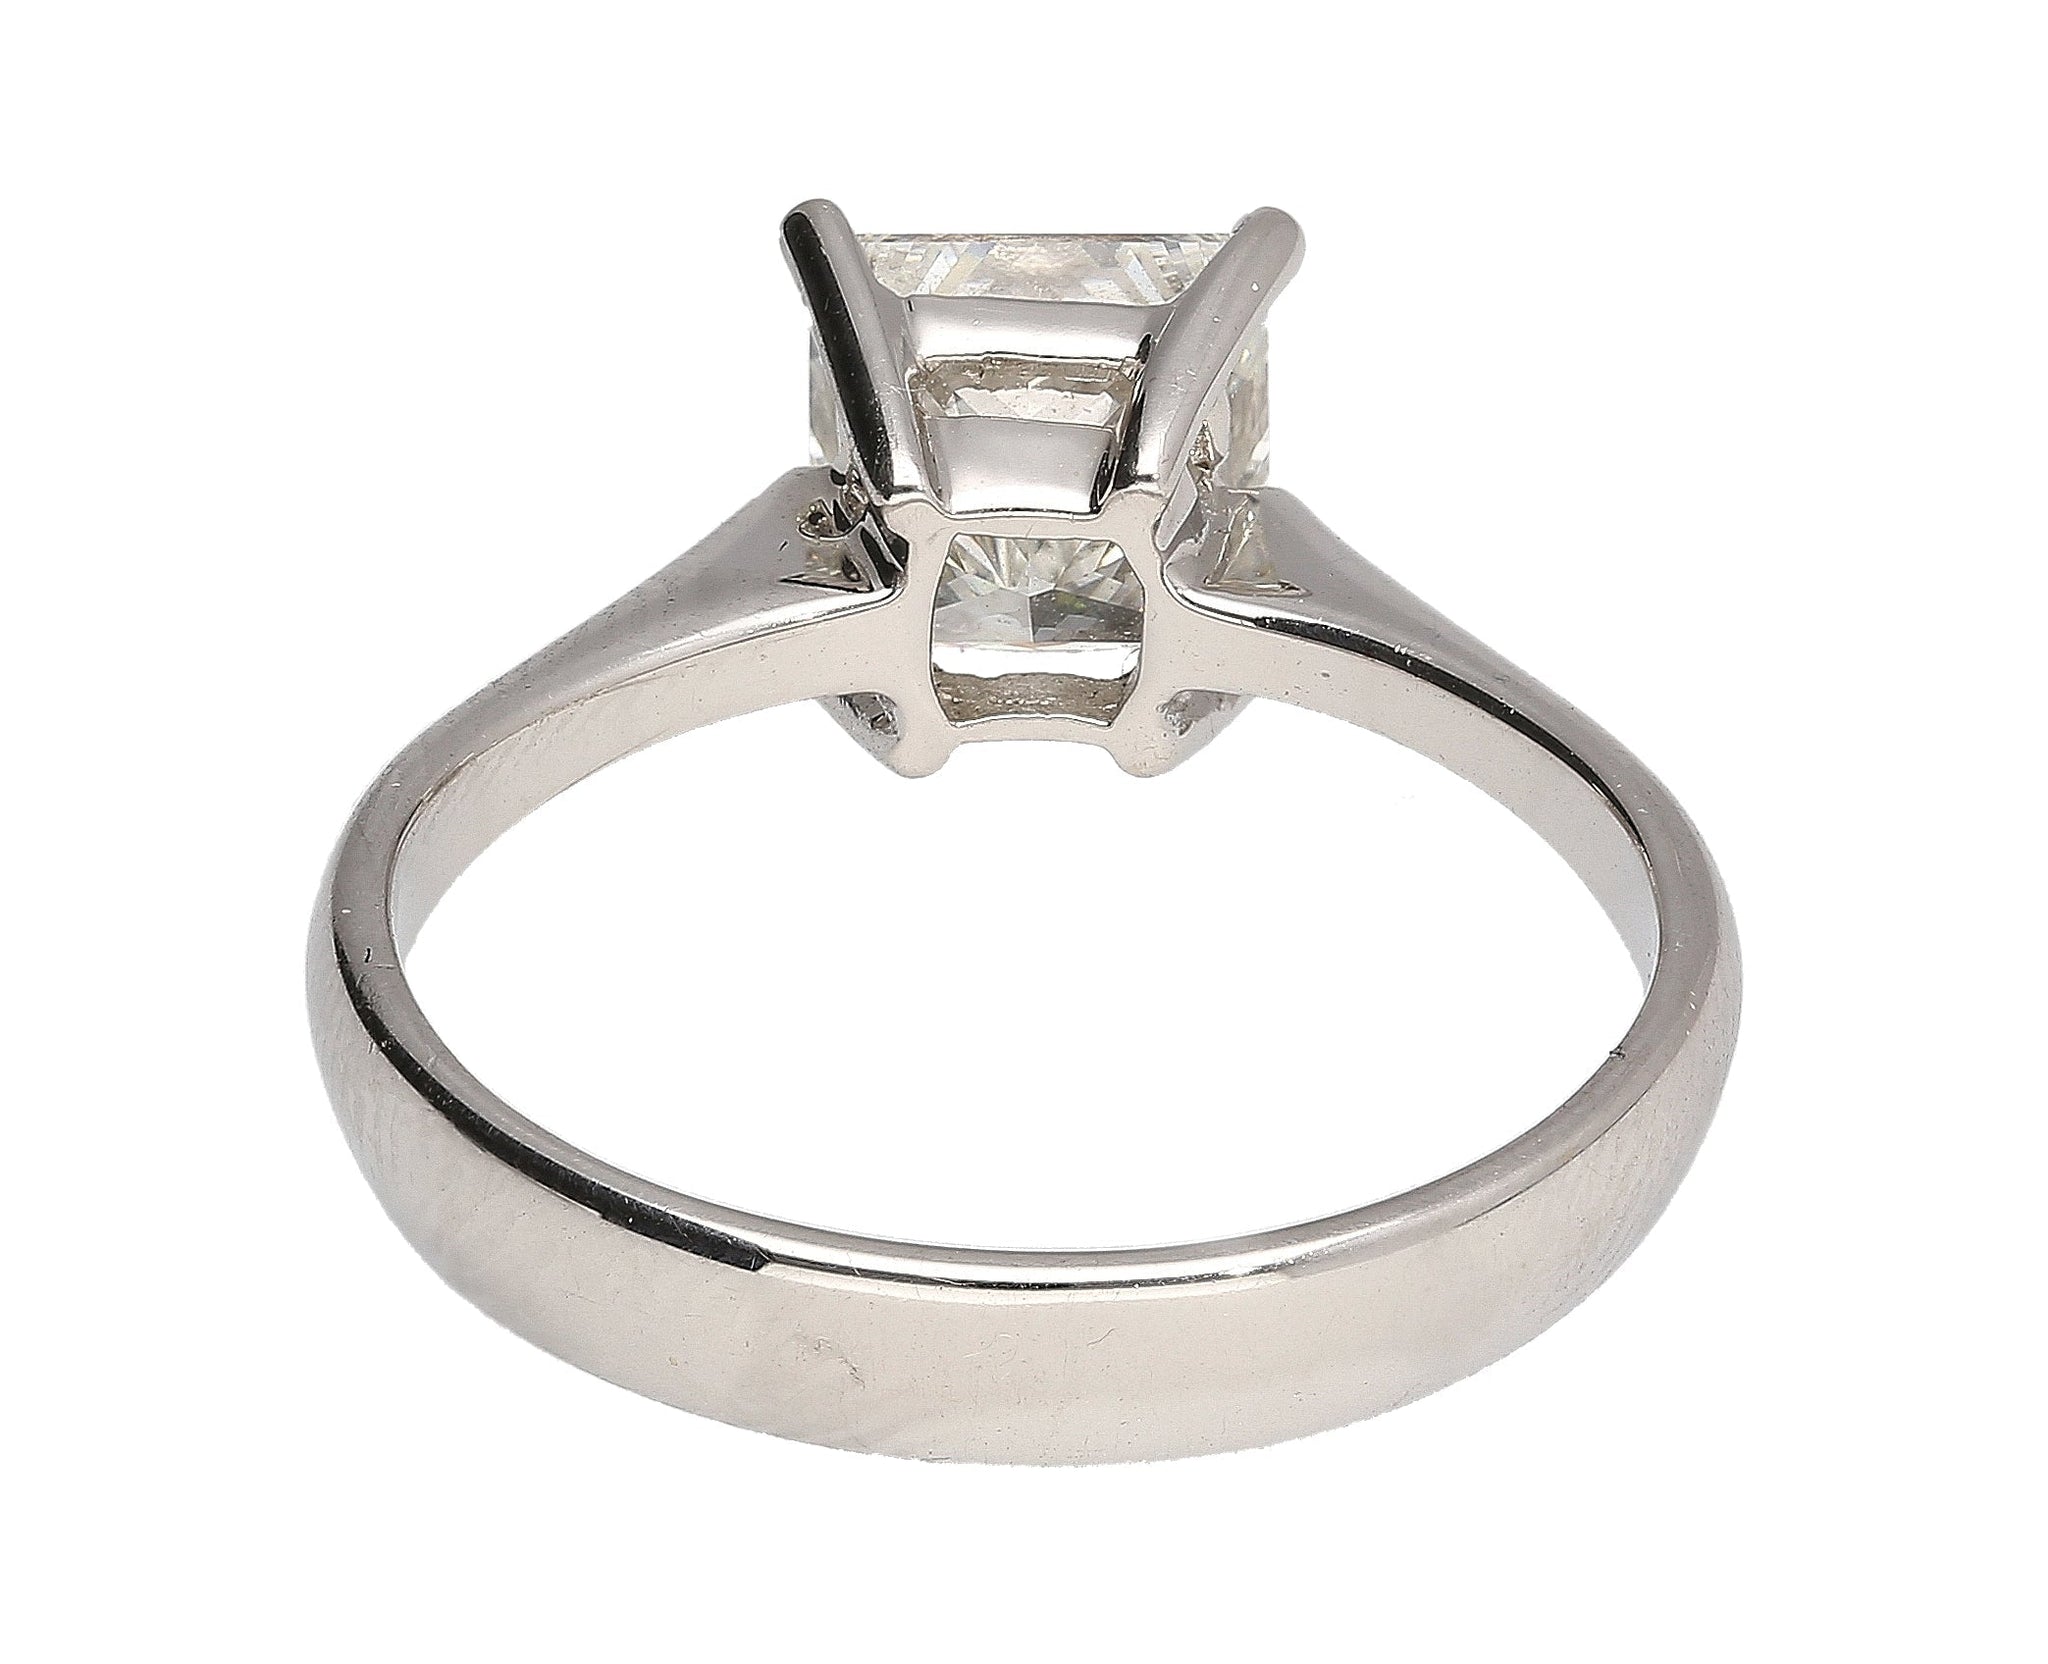 Unique Diamond Tension Set Solitaire Engagement Ring - with A 3 ct Center Princess Cut GIA Natural Diamond in White Gold